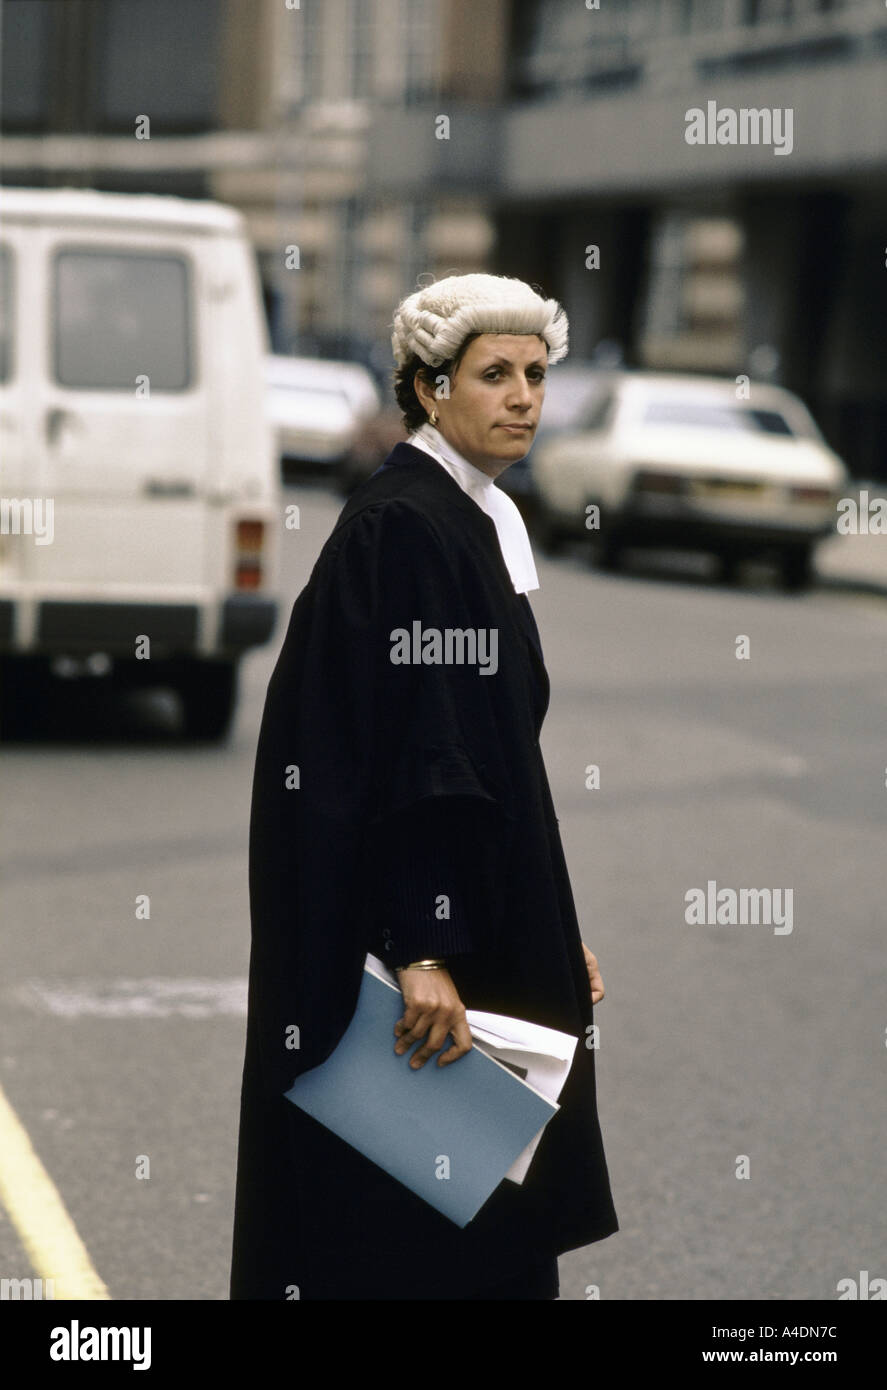 A female barrister, High Courts, London Stock Photo